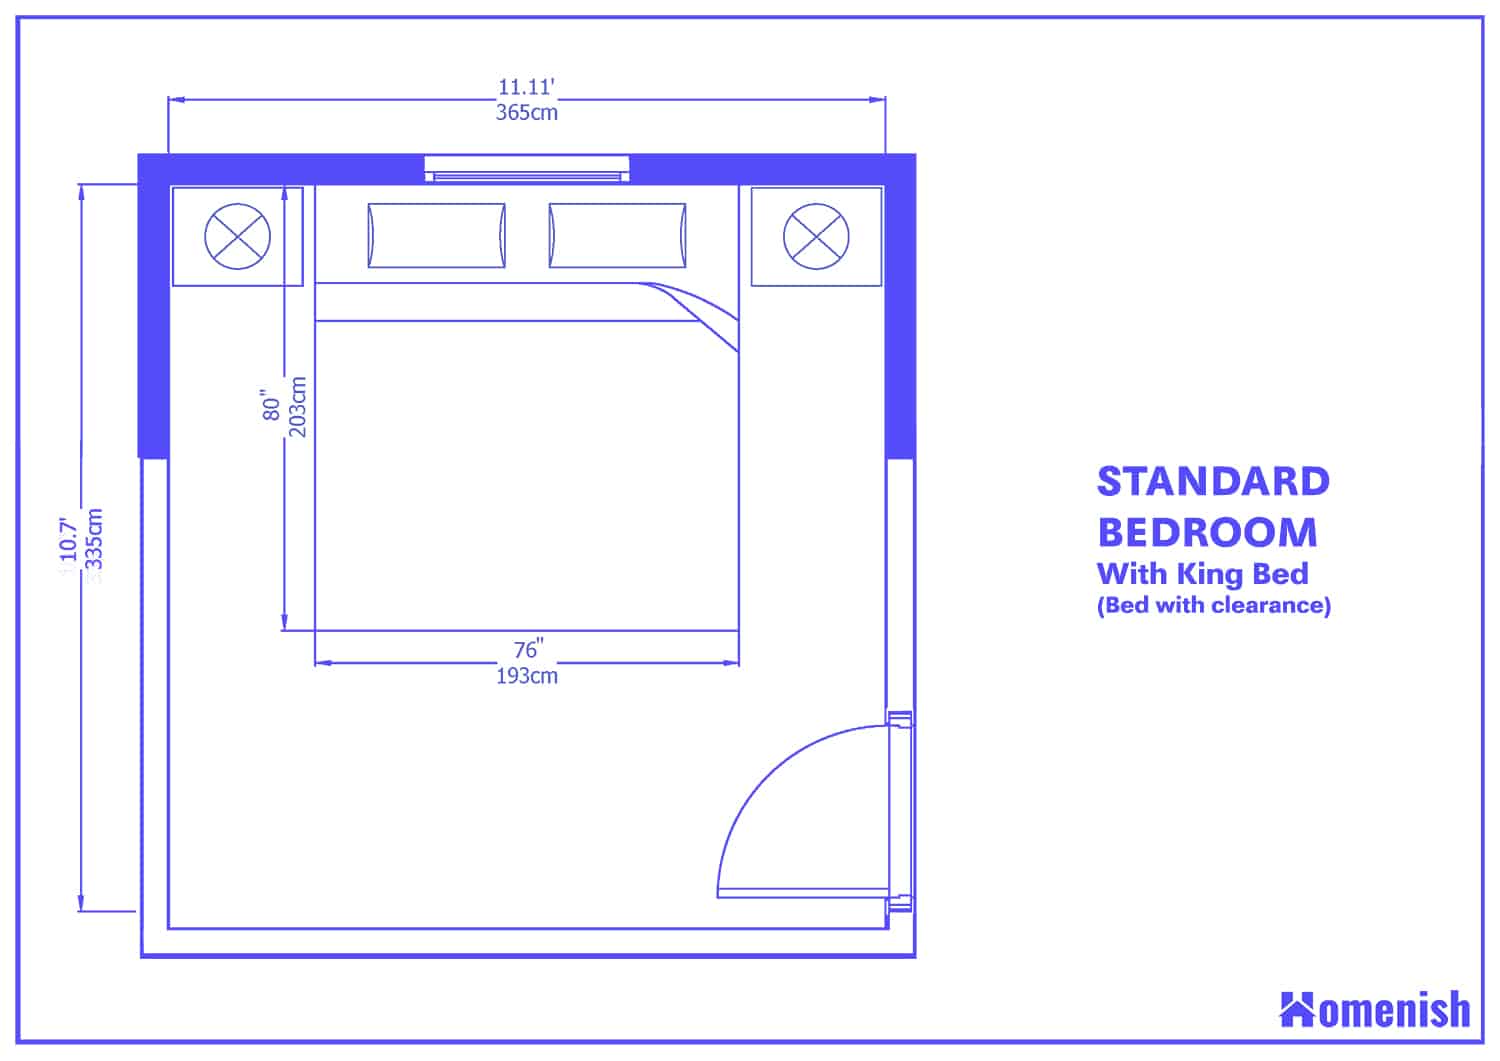 Average Bedroom Size And Layout Guide, Width Of Standard King Bed